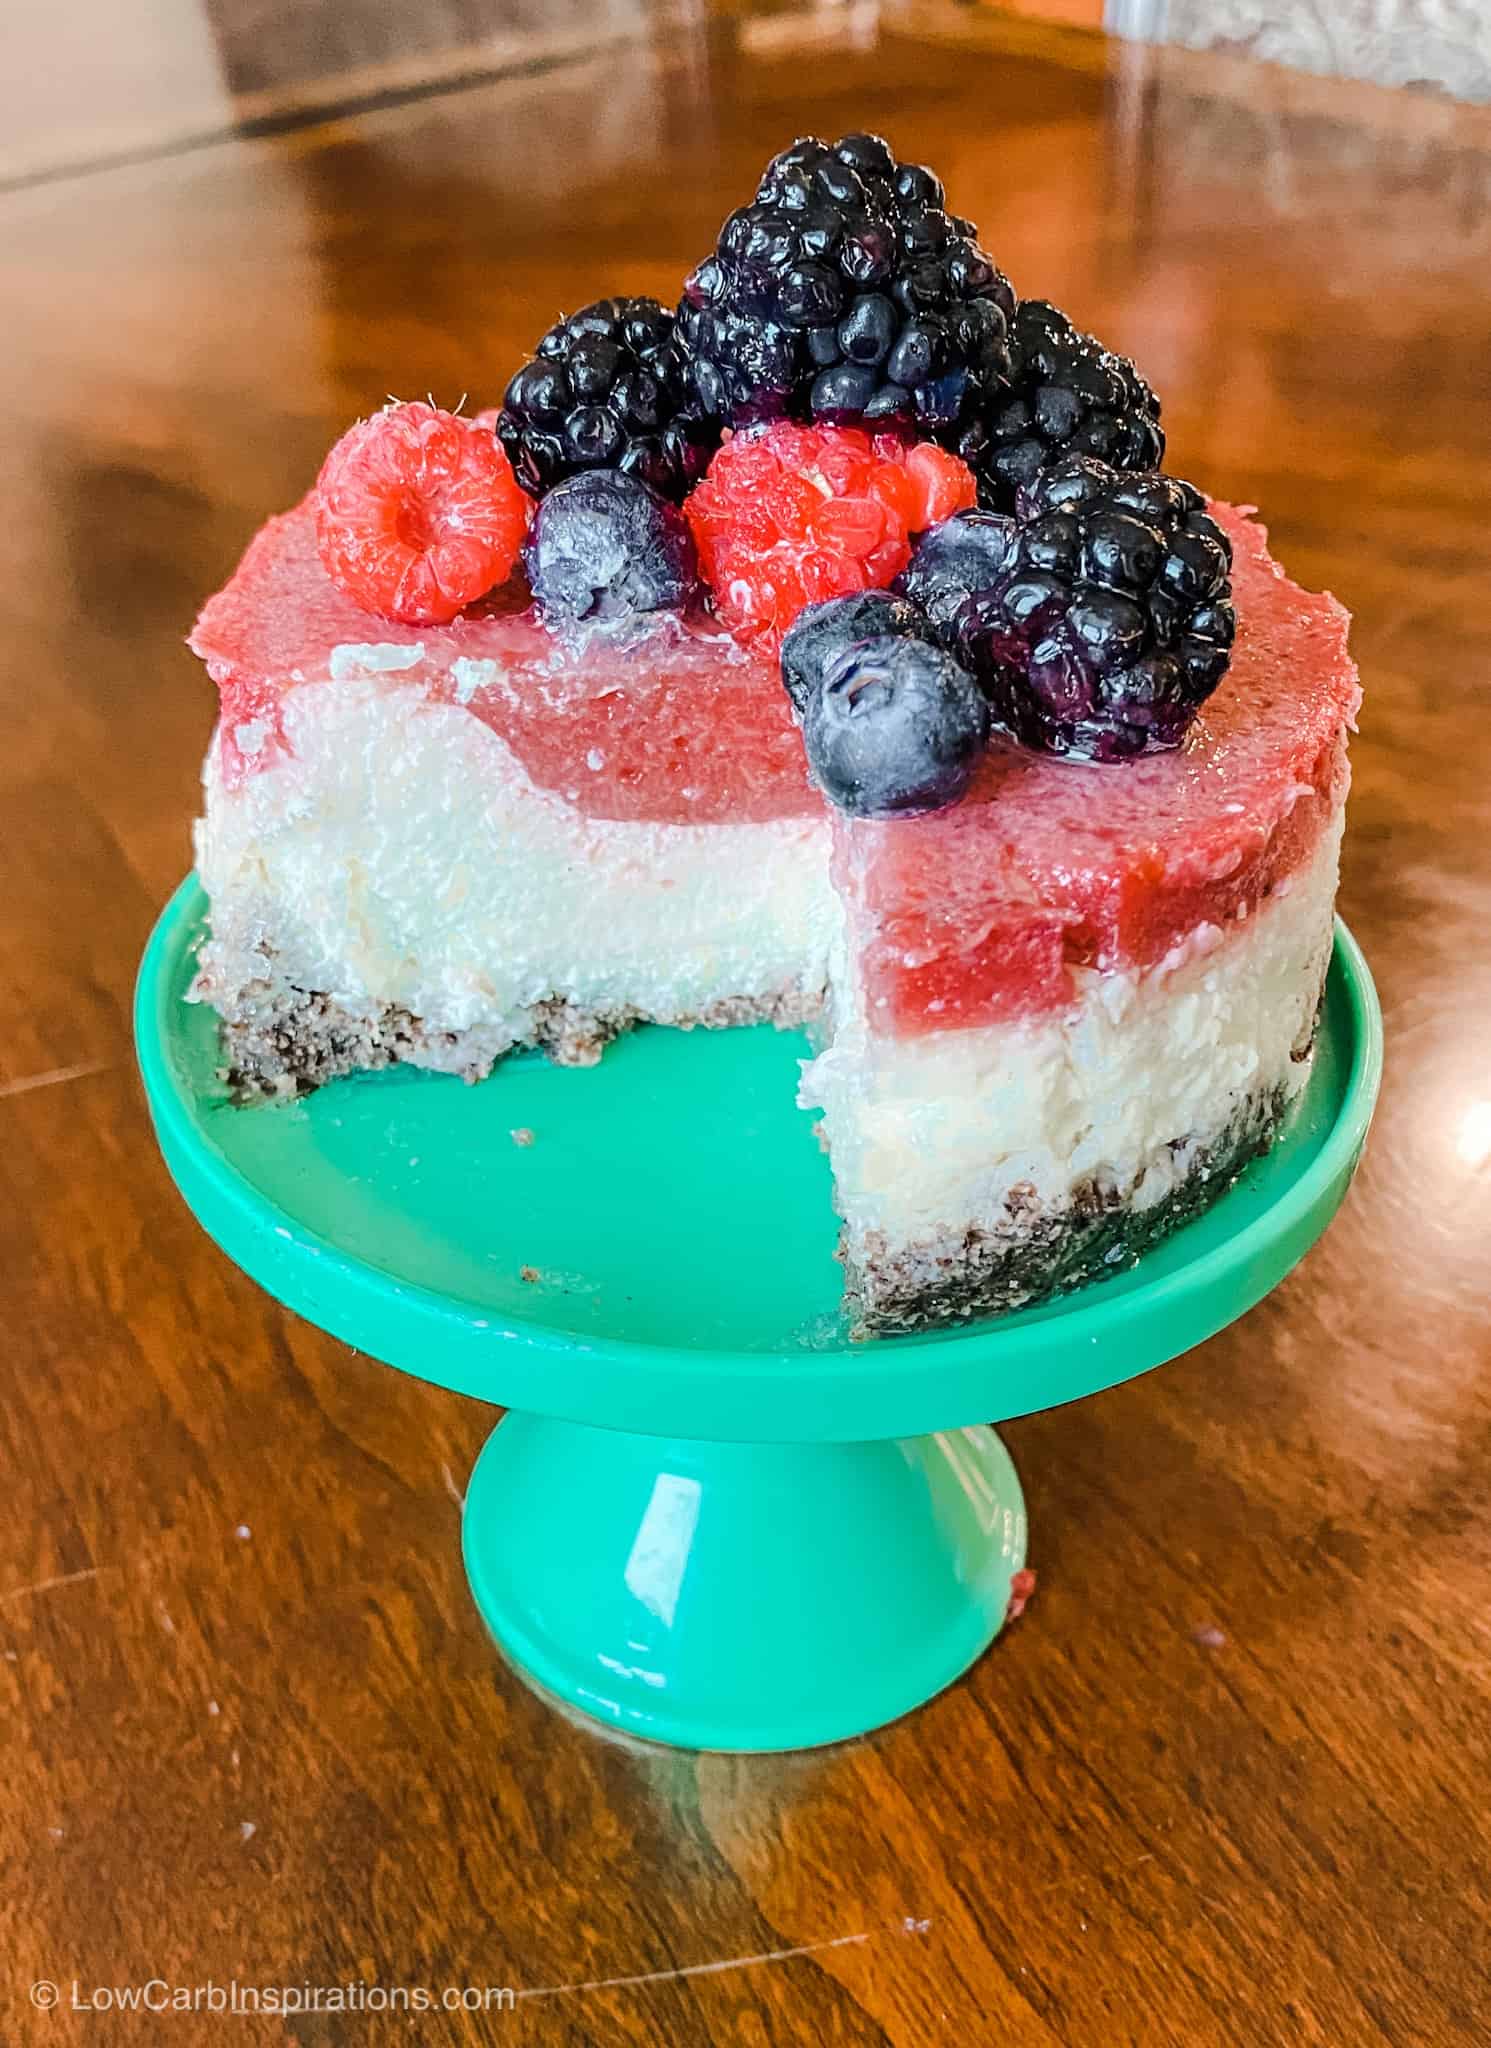 Keto Cheesecake Recipe with a Strawberry Topping!